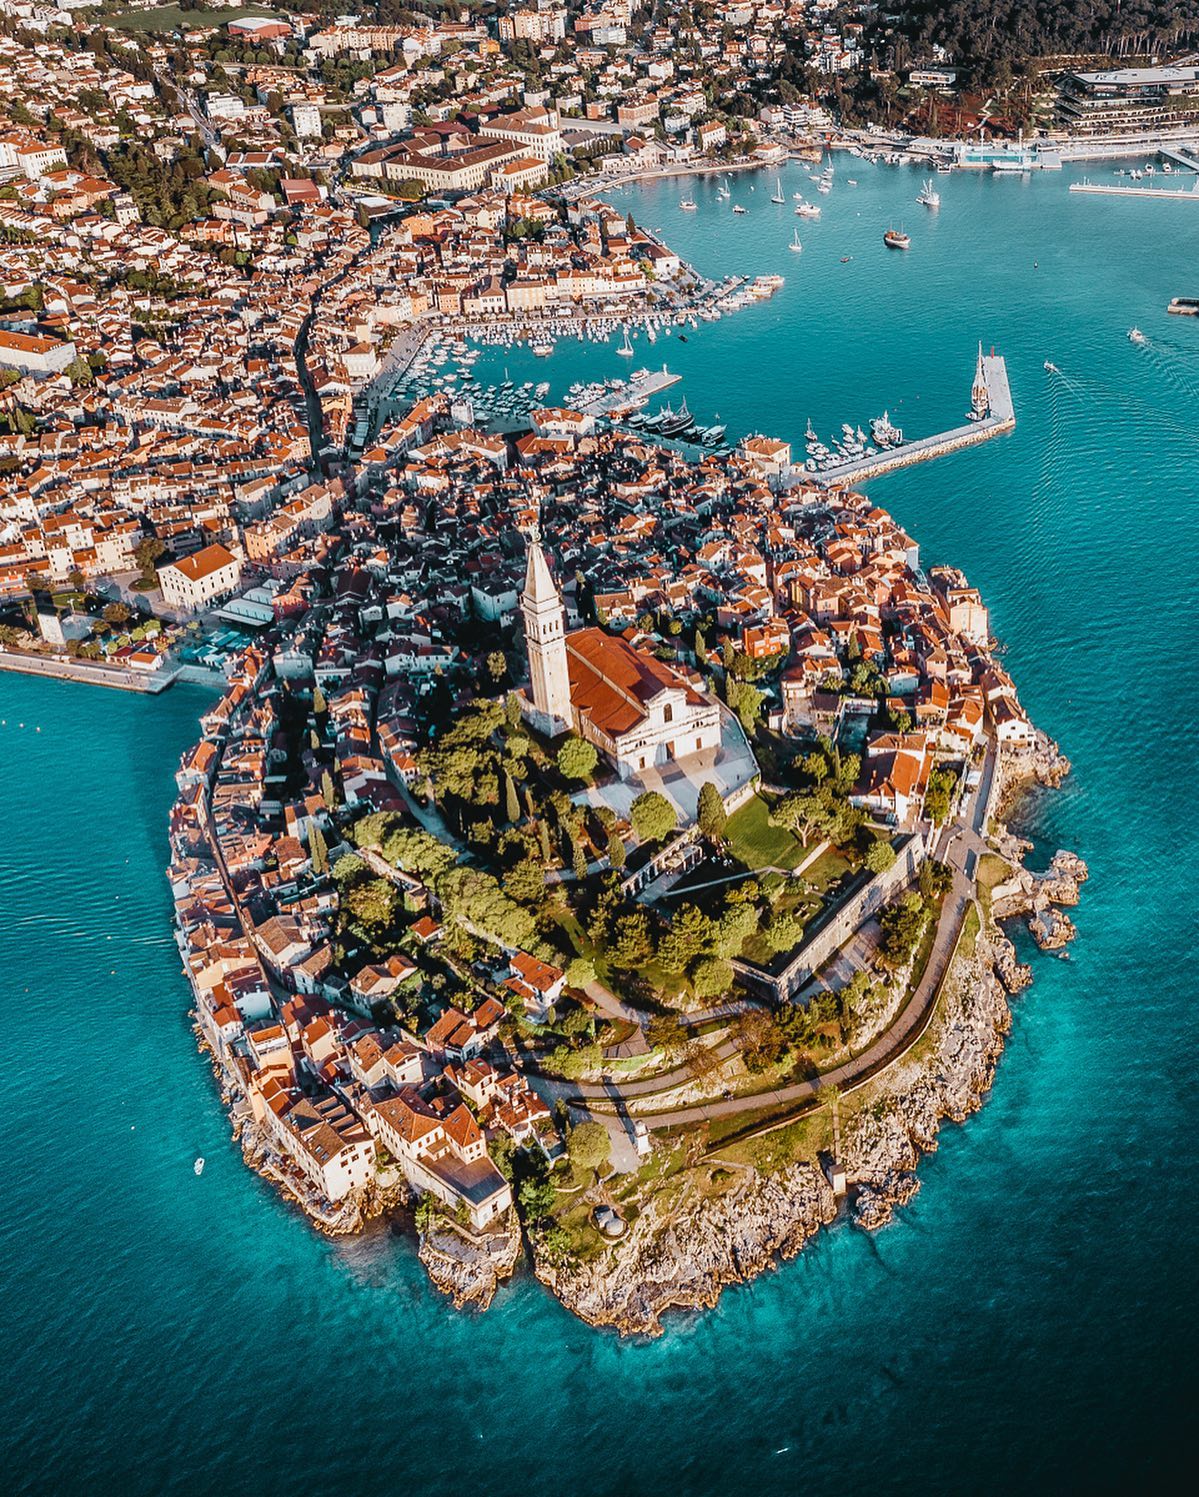 Rovinj, one of the most instagrammable places in Croatia